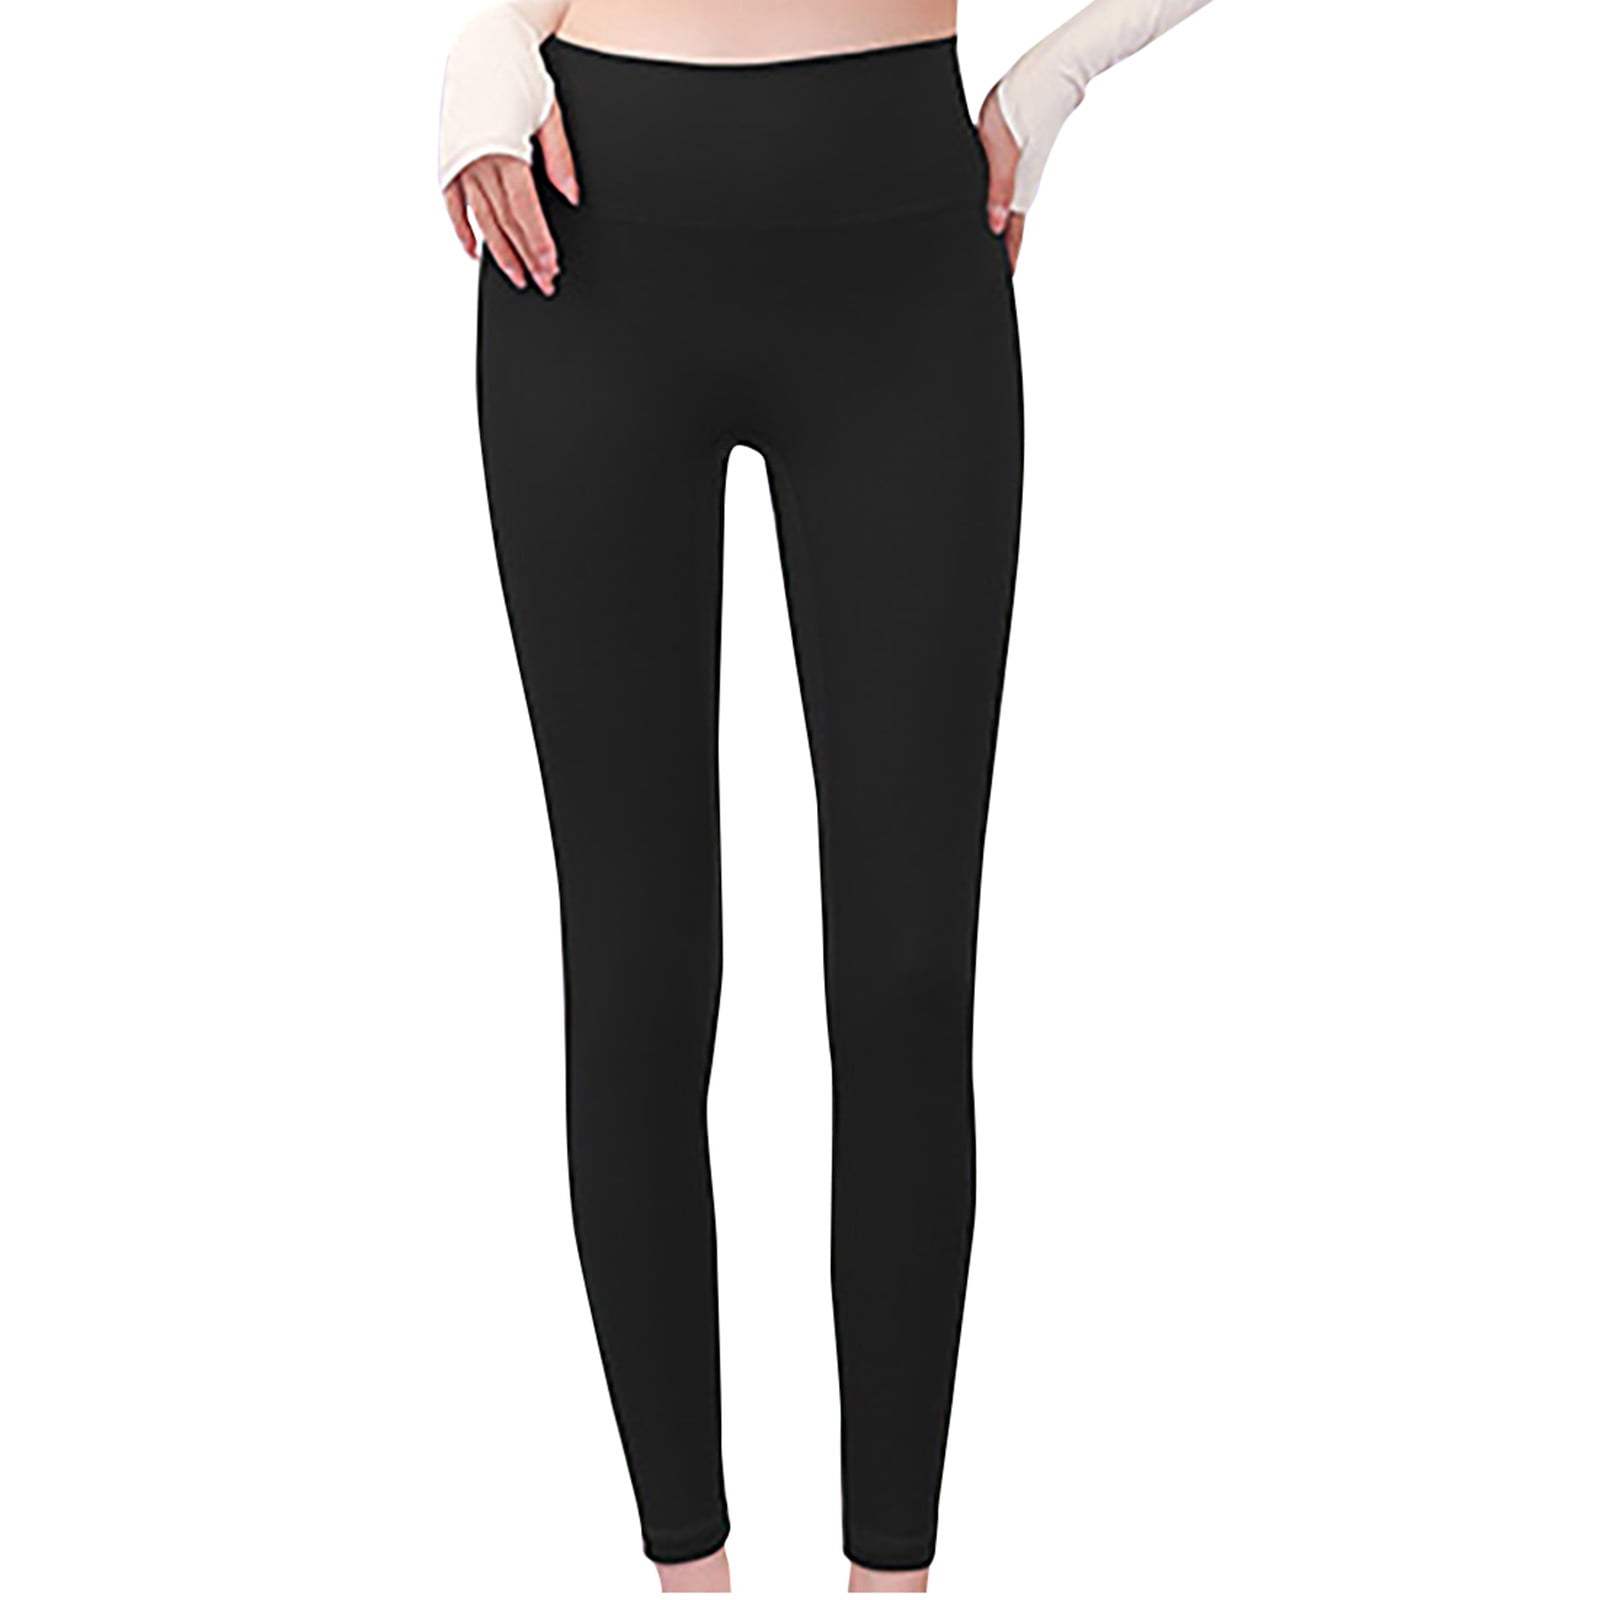 SELONE Leggings for Women Tummy Control Workout Butt Lifting Gym Jumpsuits  Long Length High Waist Sports Yogalicious Utility Dressy Everyday Soft